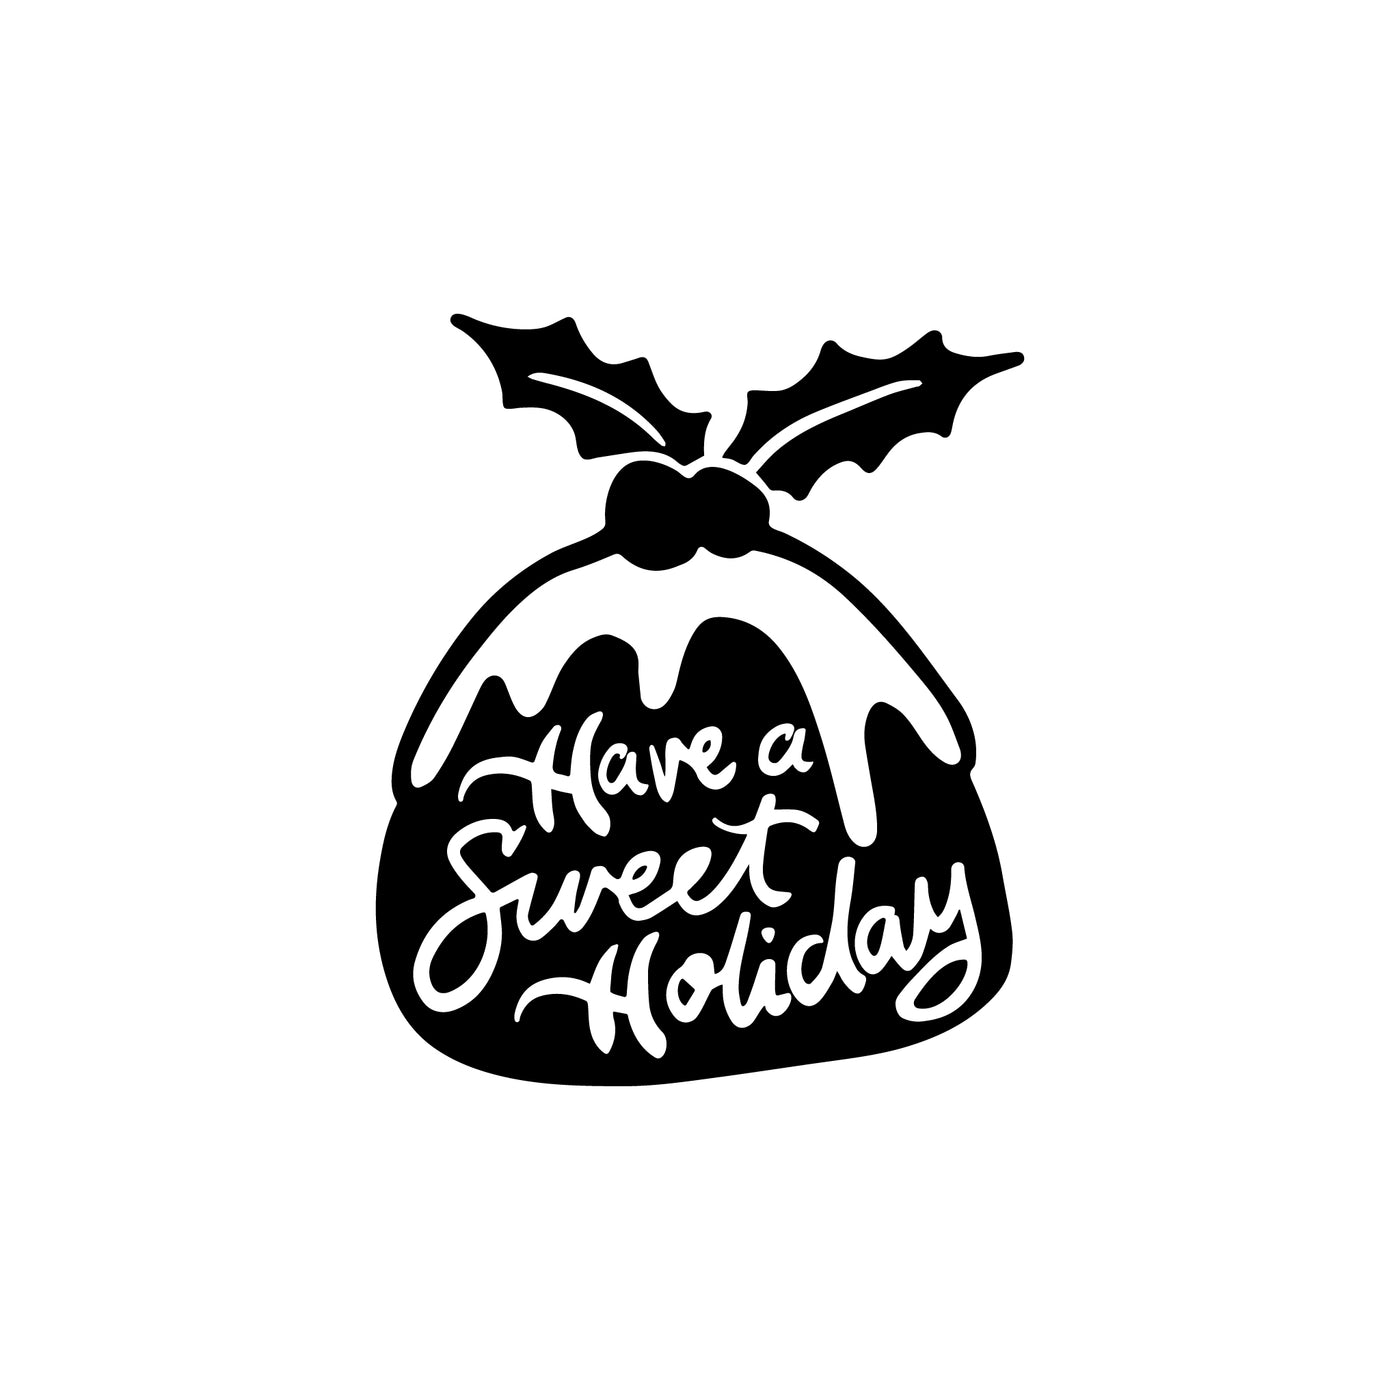 Have a Sweet Holiday Stamp